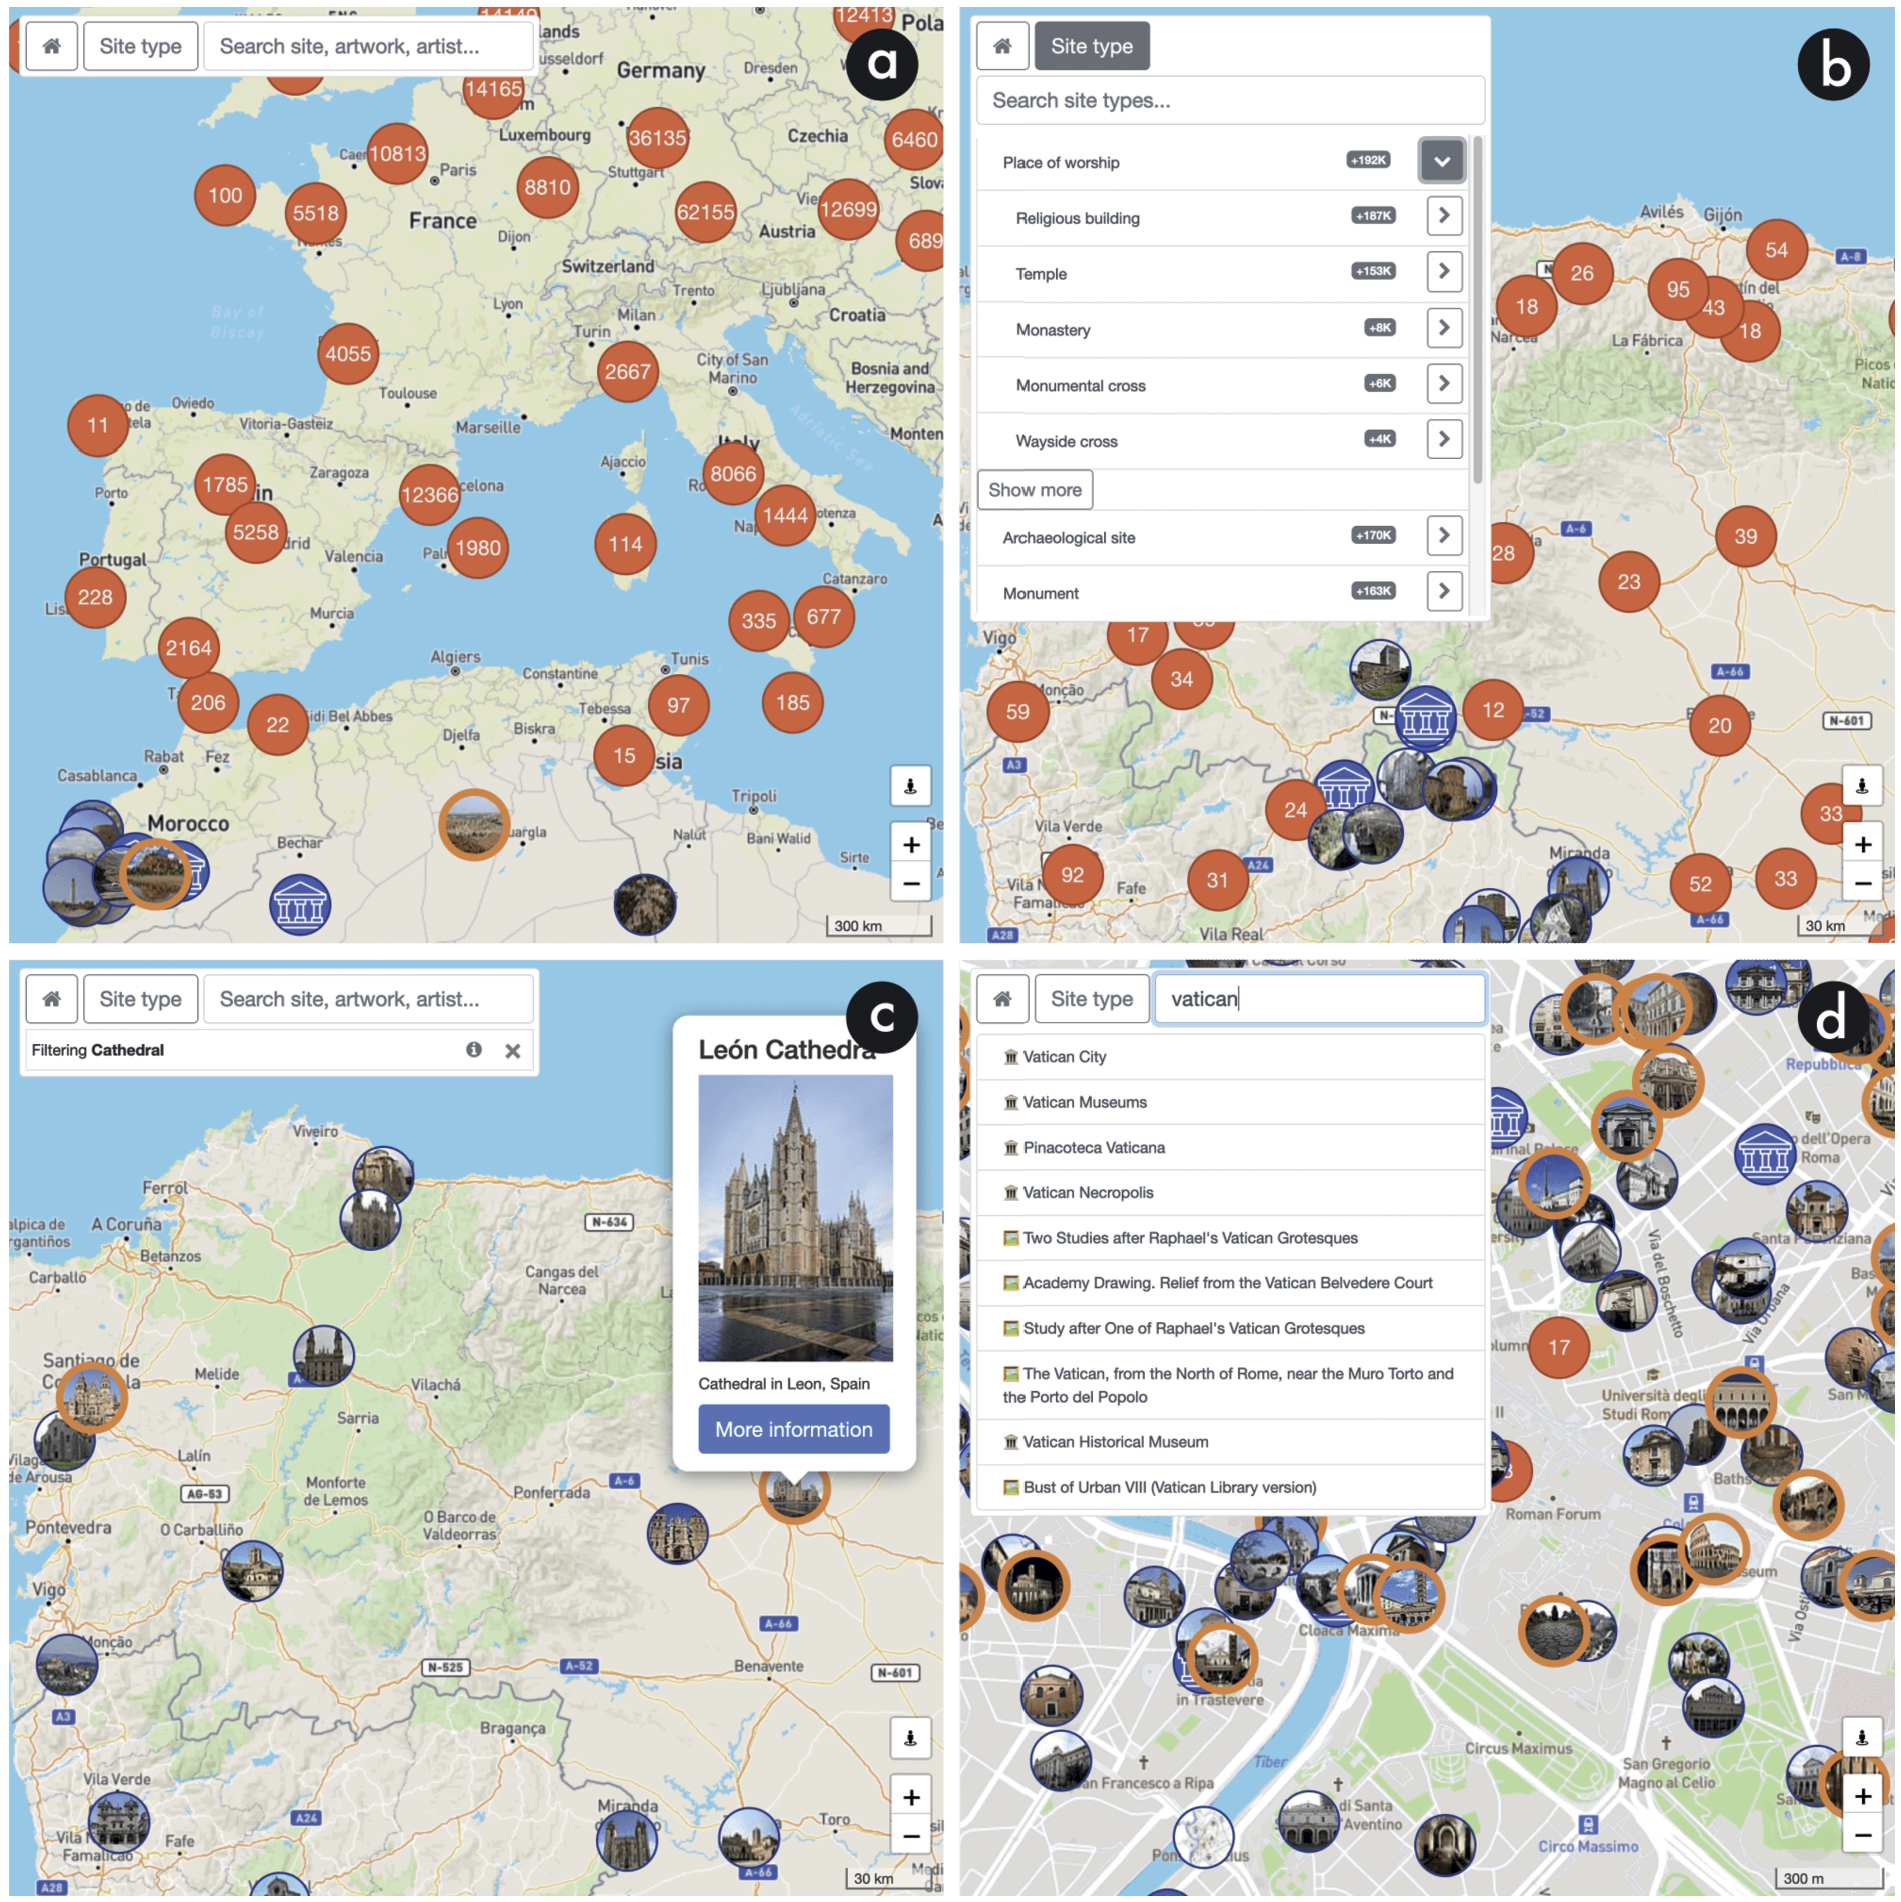 Snapshots of the map interface of LOD4Culture. (a) Route /app/?loc=41.623655,3.801270,5z: the map covers a very large area that includes South-West Europe and North Africa; cluster markers aggregating CH sites are shown in Europe and the Mediterranean coast of Africa, while single CH site markers are displayed in the rest of Africa. (b) Route /app/?loc=42.757188,-6.908581,8z: the map is positioned in the last part of the Way of St James (North-West Spain); cluster markers are positioned in the main cities of the view, while single CH site markers are plotted along the North-East border of Portugal and Spain; the taxonomy of CH site types is displayed in the top-left form. (c) Route /app/?loc=42.757188,-6.908581,8z&siteType=http://www.wikidata.org/entity/Q2977: the map covers the same area as (b), but only cathedrals are shown due to the type filter set in the top-left form; a popup of León Cathedral is displayed. (d) Route /app/?loc=41.893061,12.482765,15z: the map is centered in a tiny area, corresponding to the city center of Rome; the search textbox shows a list of 10 suggestions for input text vatican that are sorted by popularity and including a distinguishing icon to differentiate the type of CH entity.